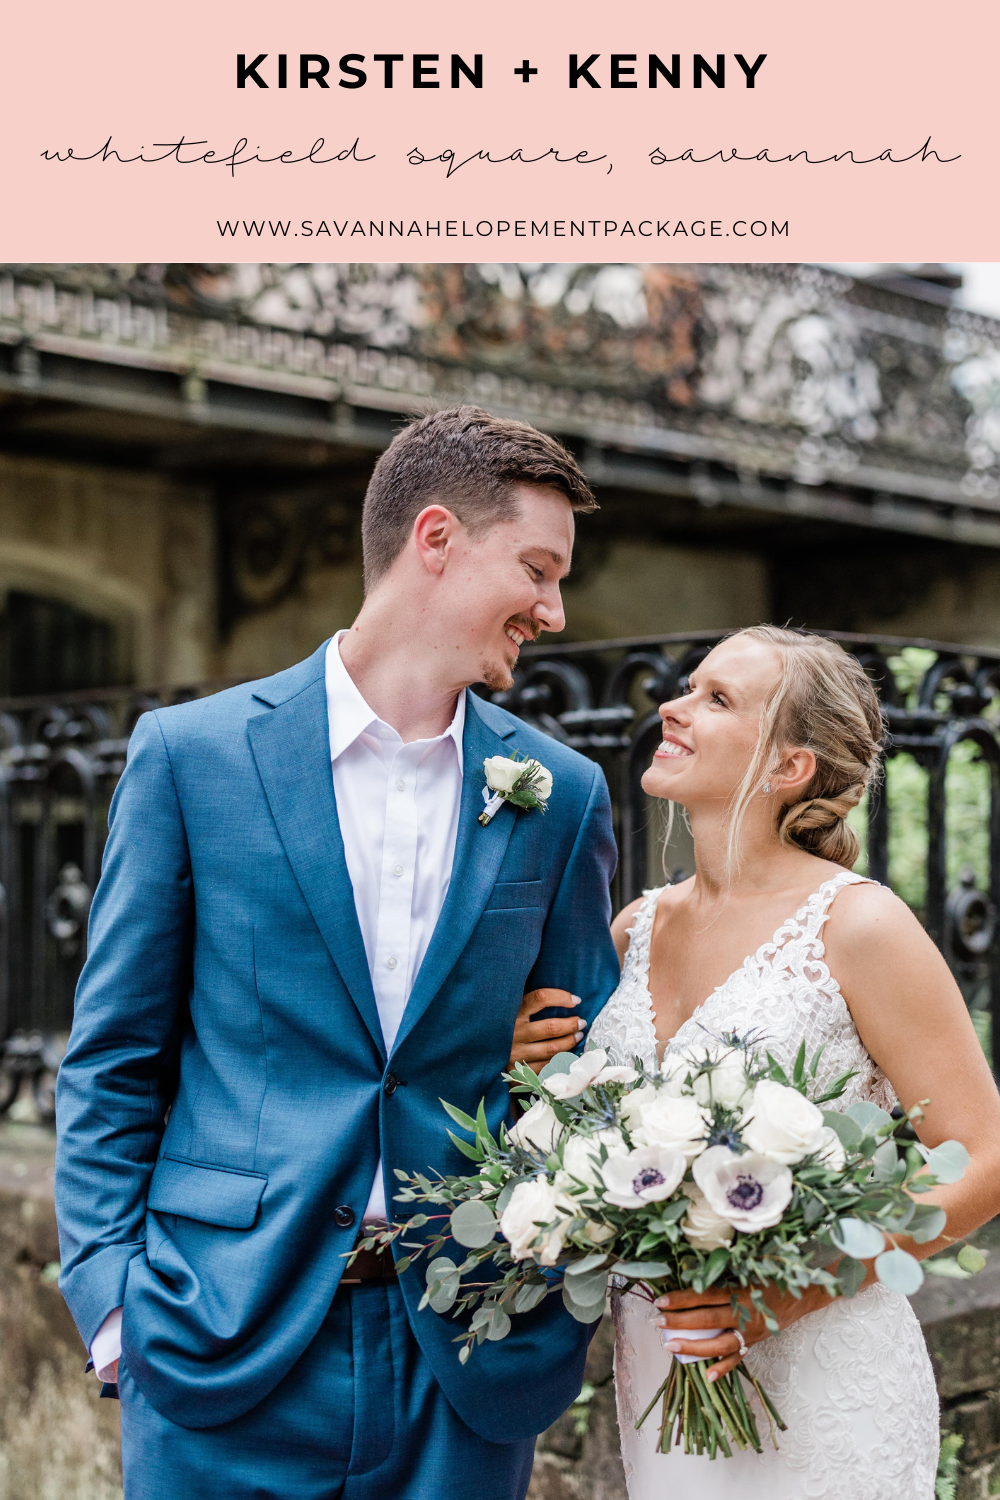 A Dreamy Whitefield Square Elopement